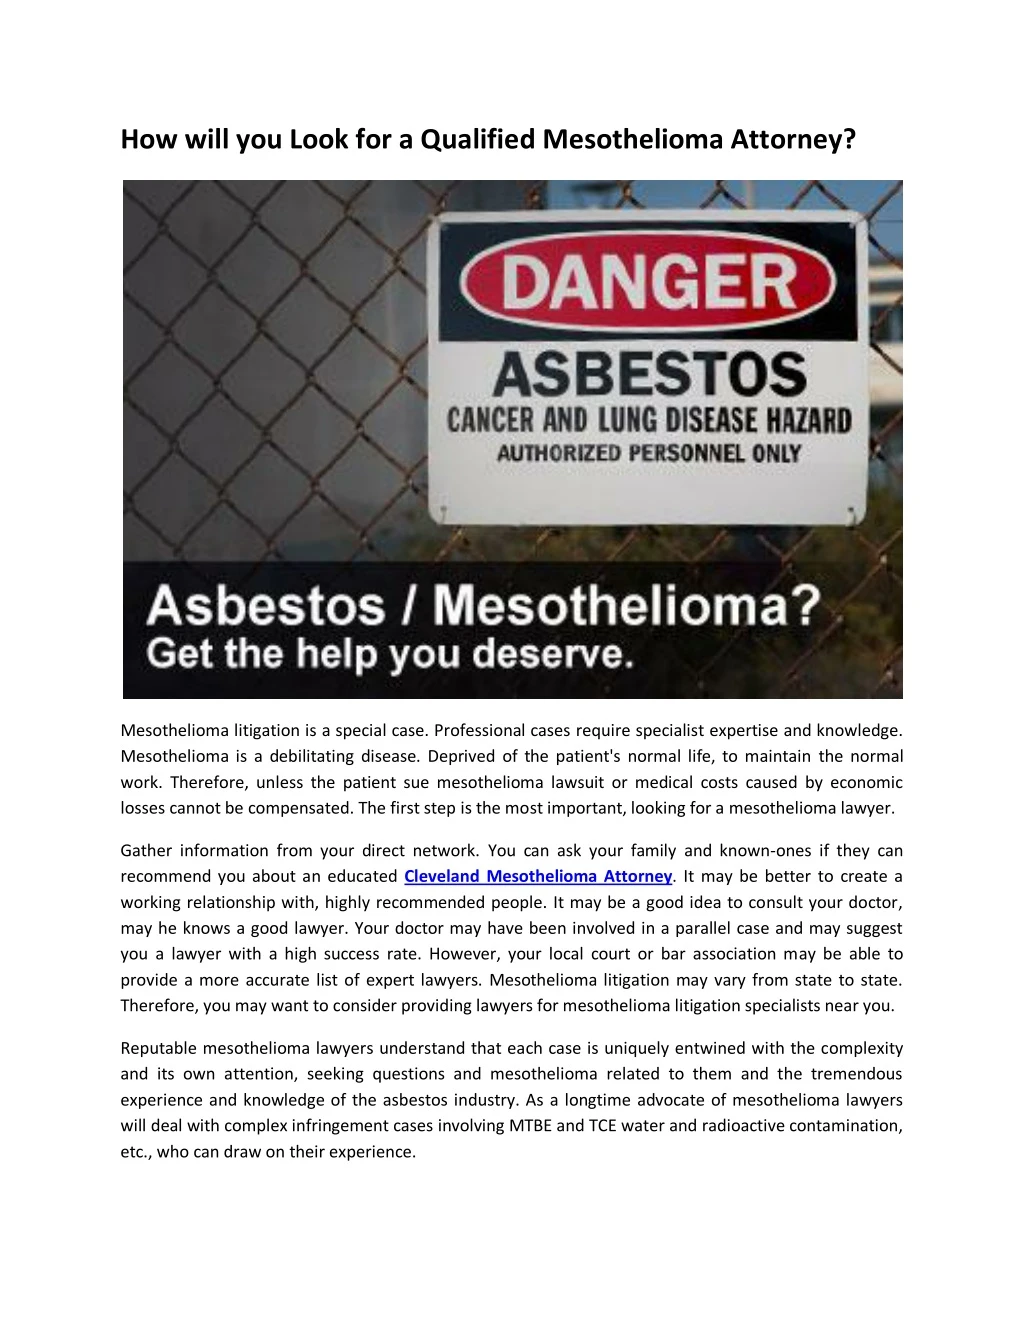 how will you look for a qualified mesothelioma